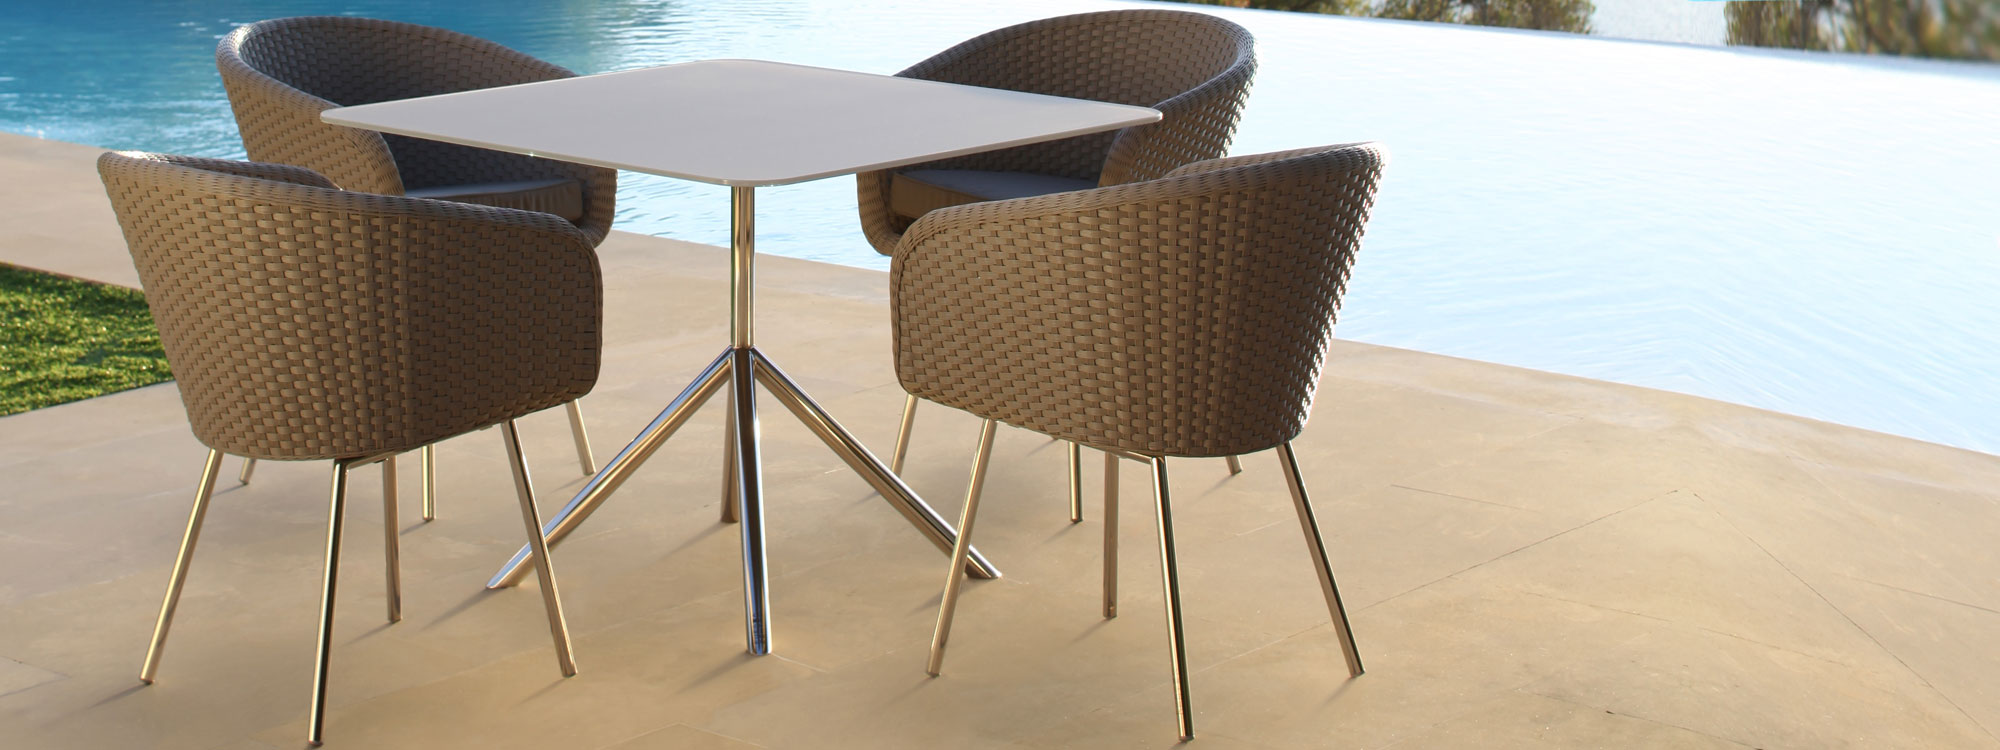 Shell modern garden furniture & retro outdoor dining furniture includes a very comfortable tub chair by FueraDentro woven garden furniture.